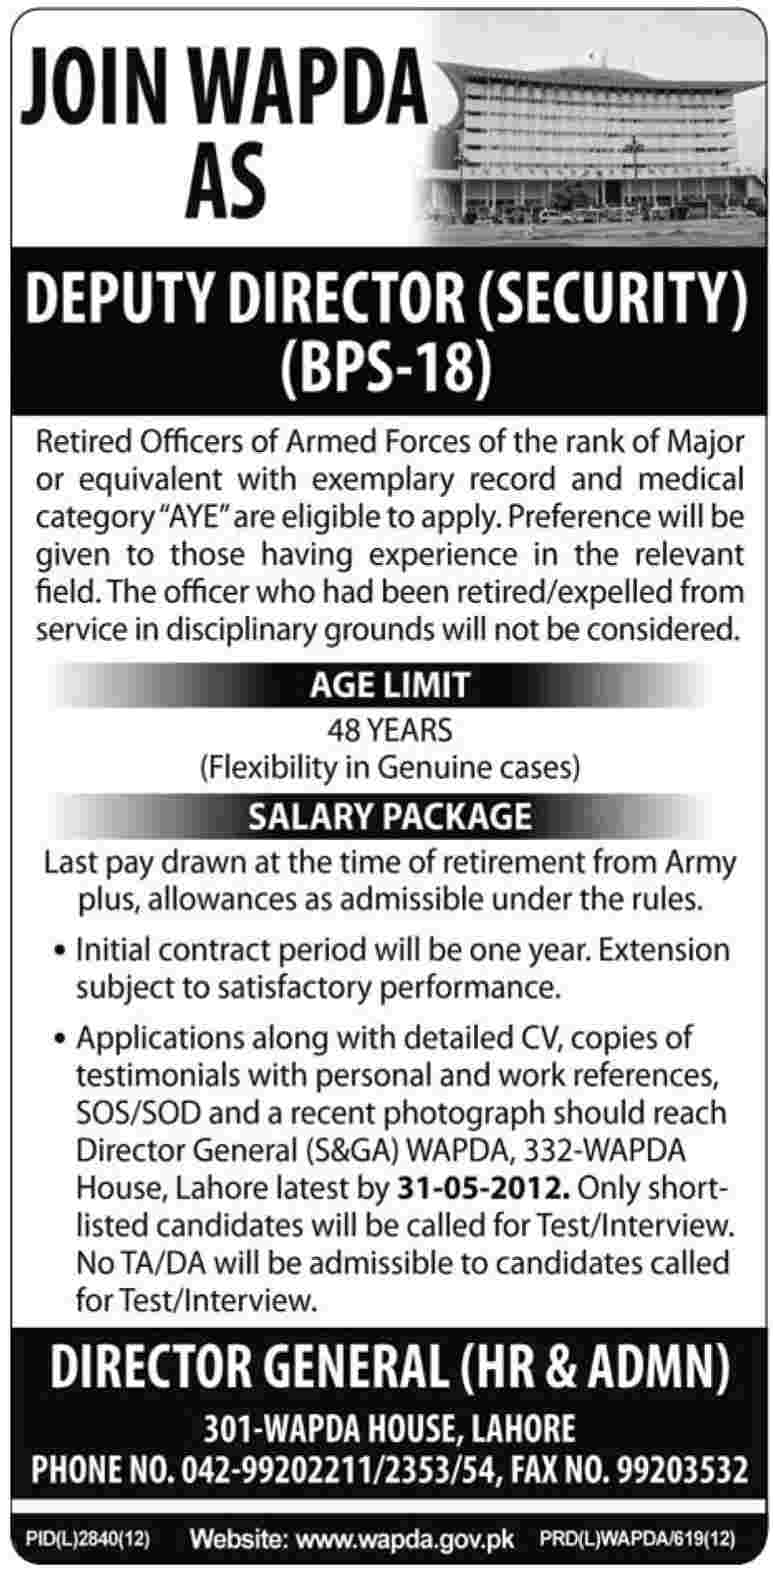 Deputy Director (Security) Required at WAPDA